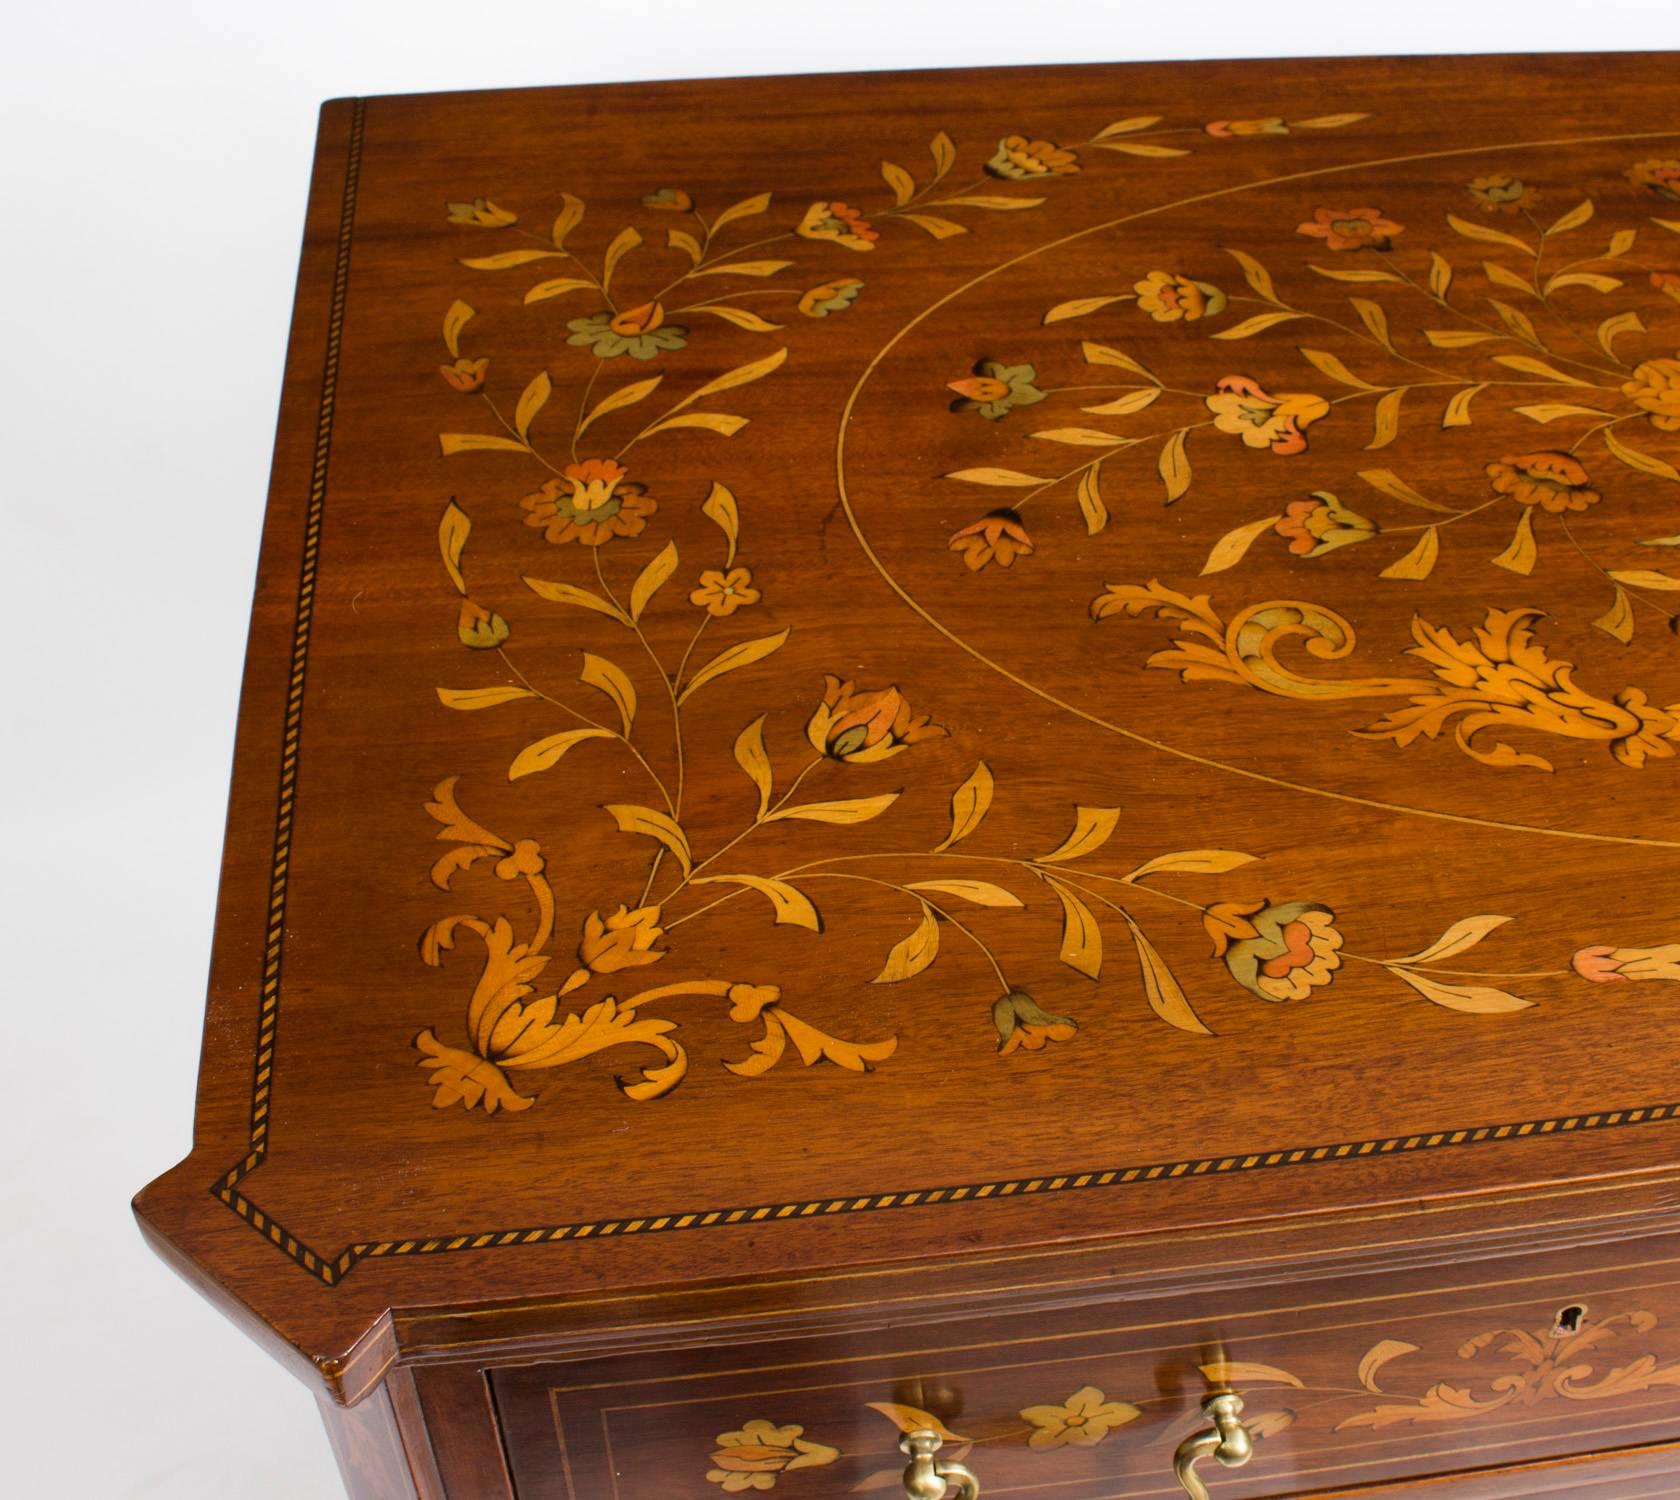 This is a stunning antique Dutch marquetry chest of drawers, circa 1900 in date.

It has been accomplished in mahogany with a plethora of exquisite hand-cut floral marquetry patterns. The rectangular top and the sides all feature fabulous floral